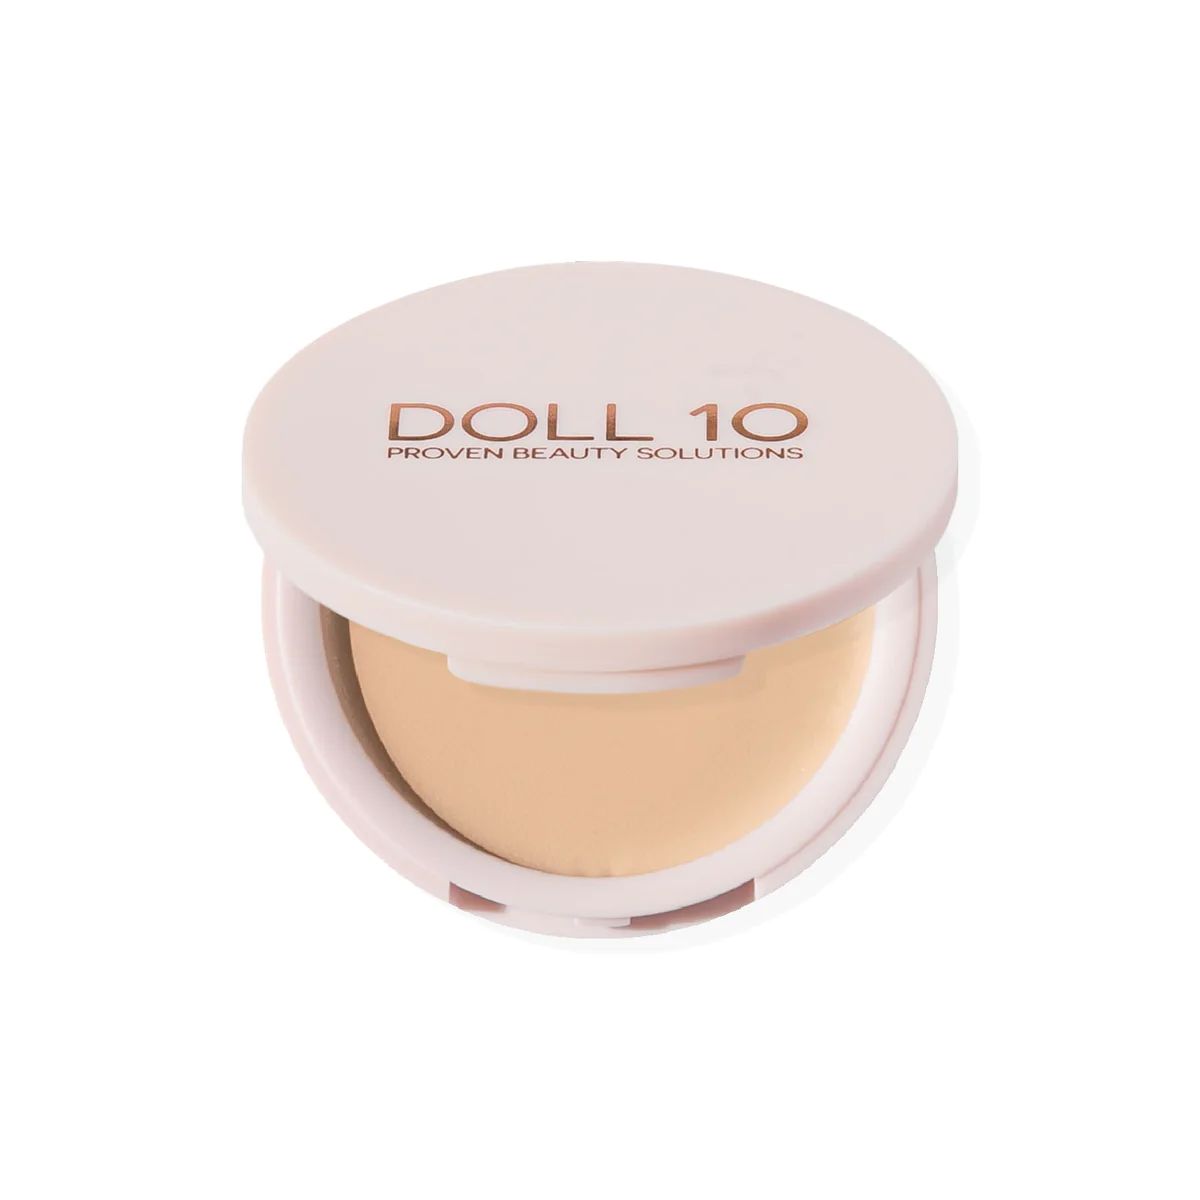 Doll 10 Conceal It Concealer | Doll 10 Beauty